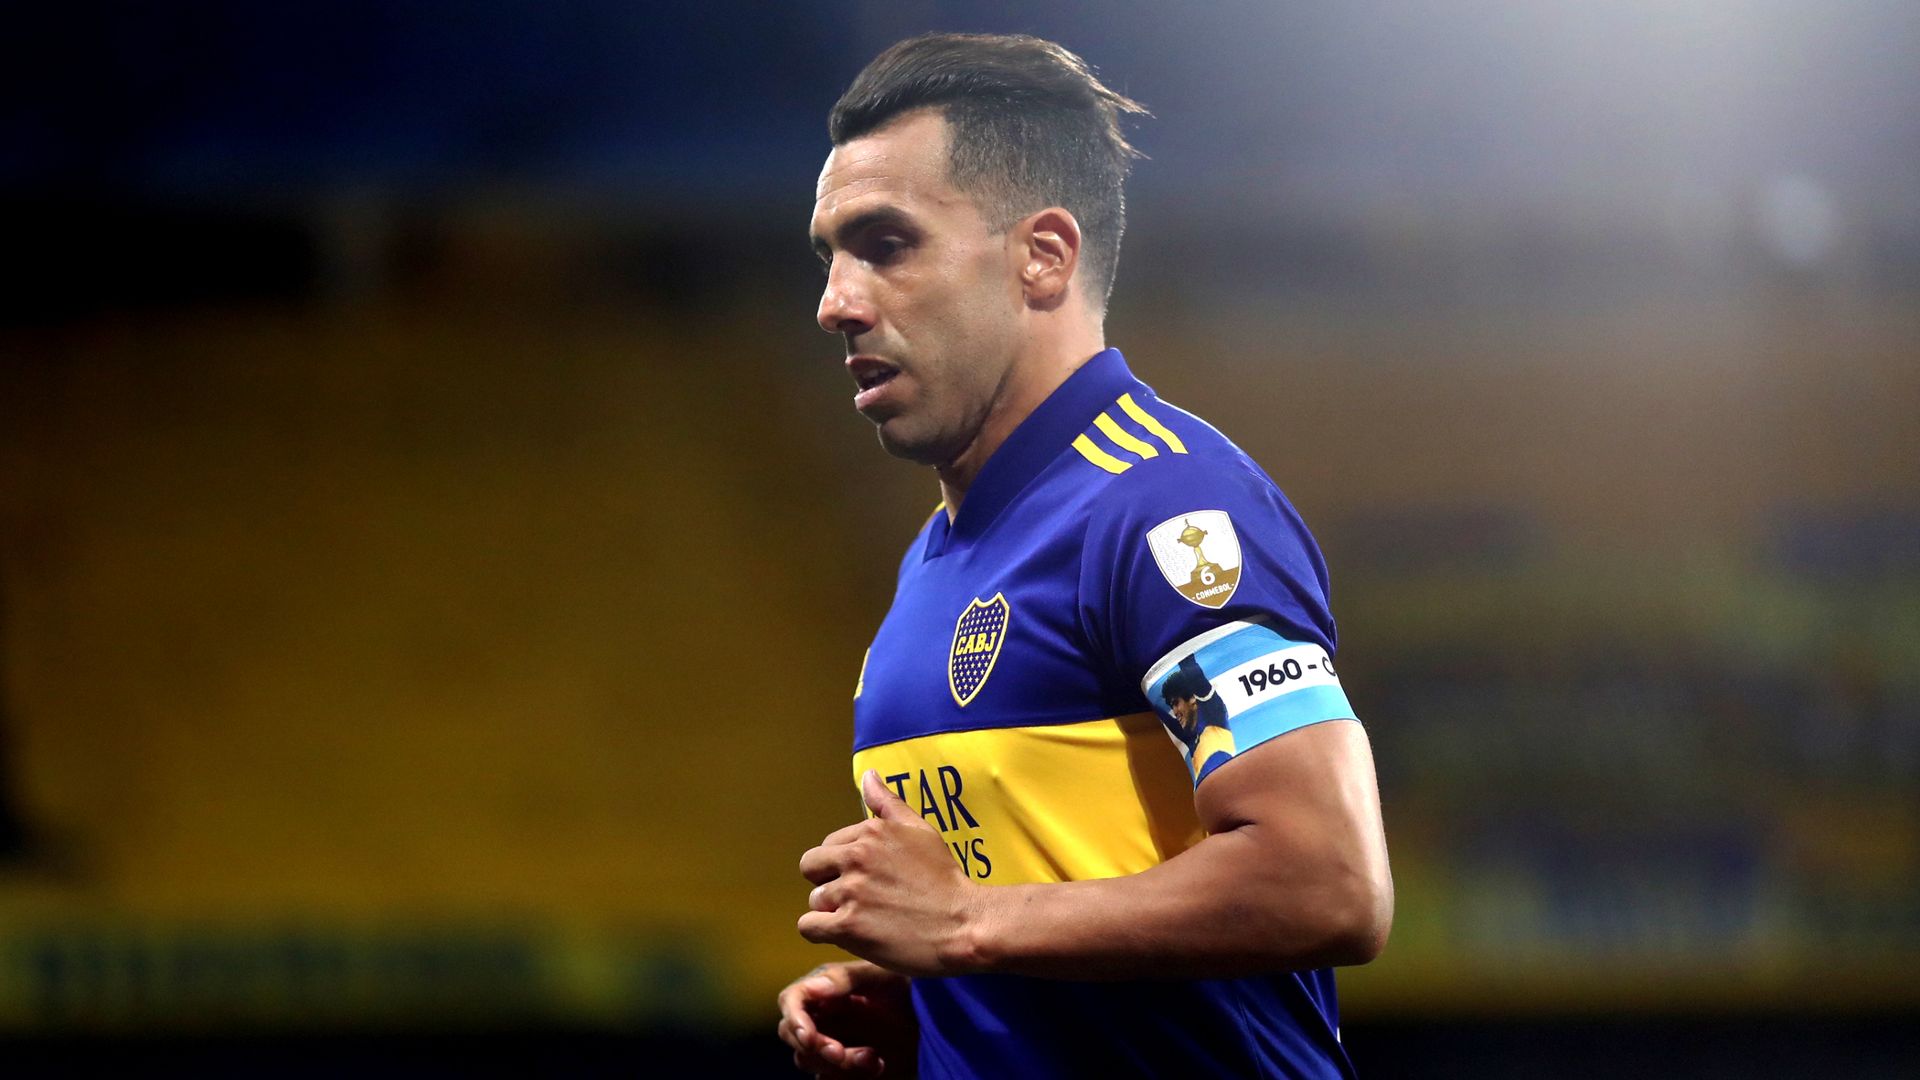 Tevez retires following death of his father : 'I lost my No 1 fan'